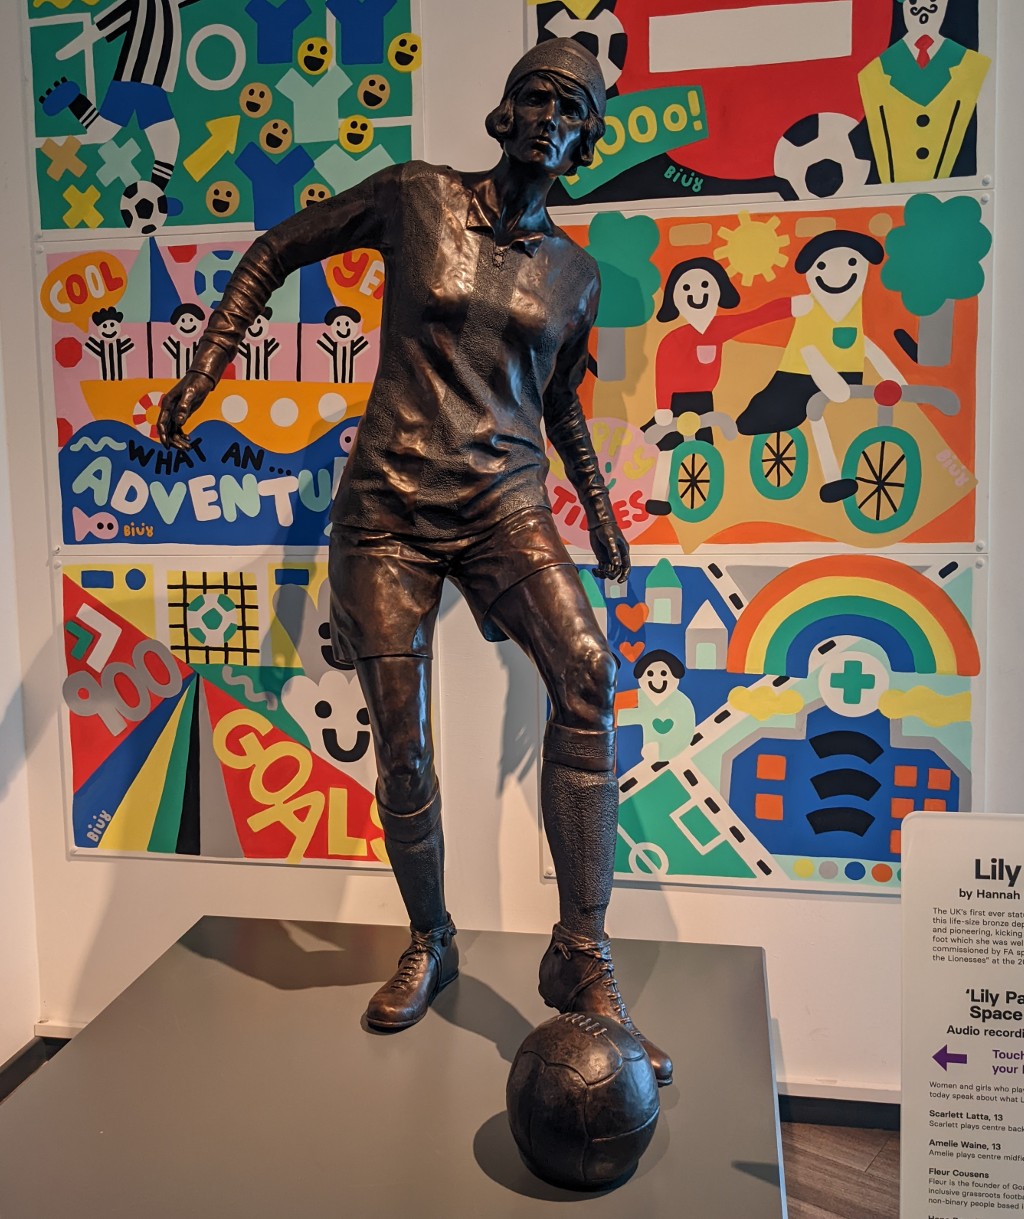 Lily Parr statue at the National Football Museum